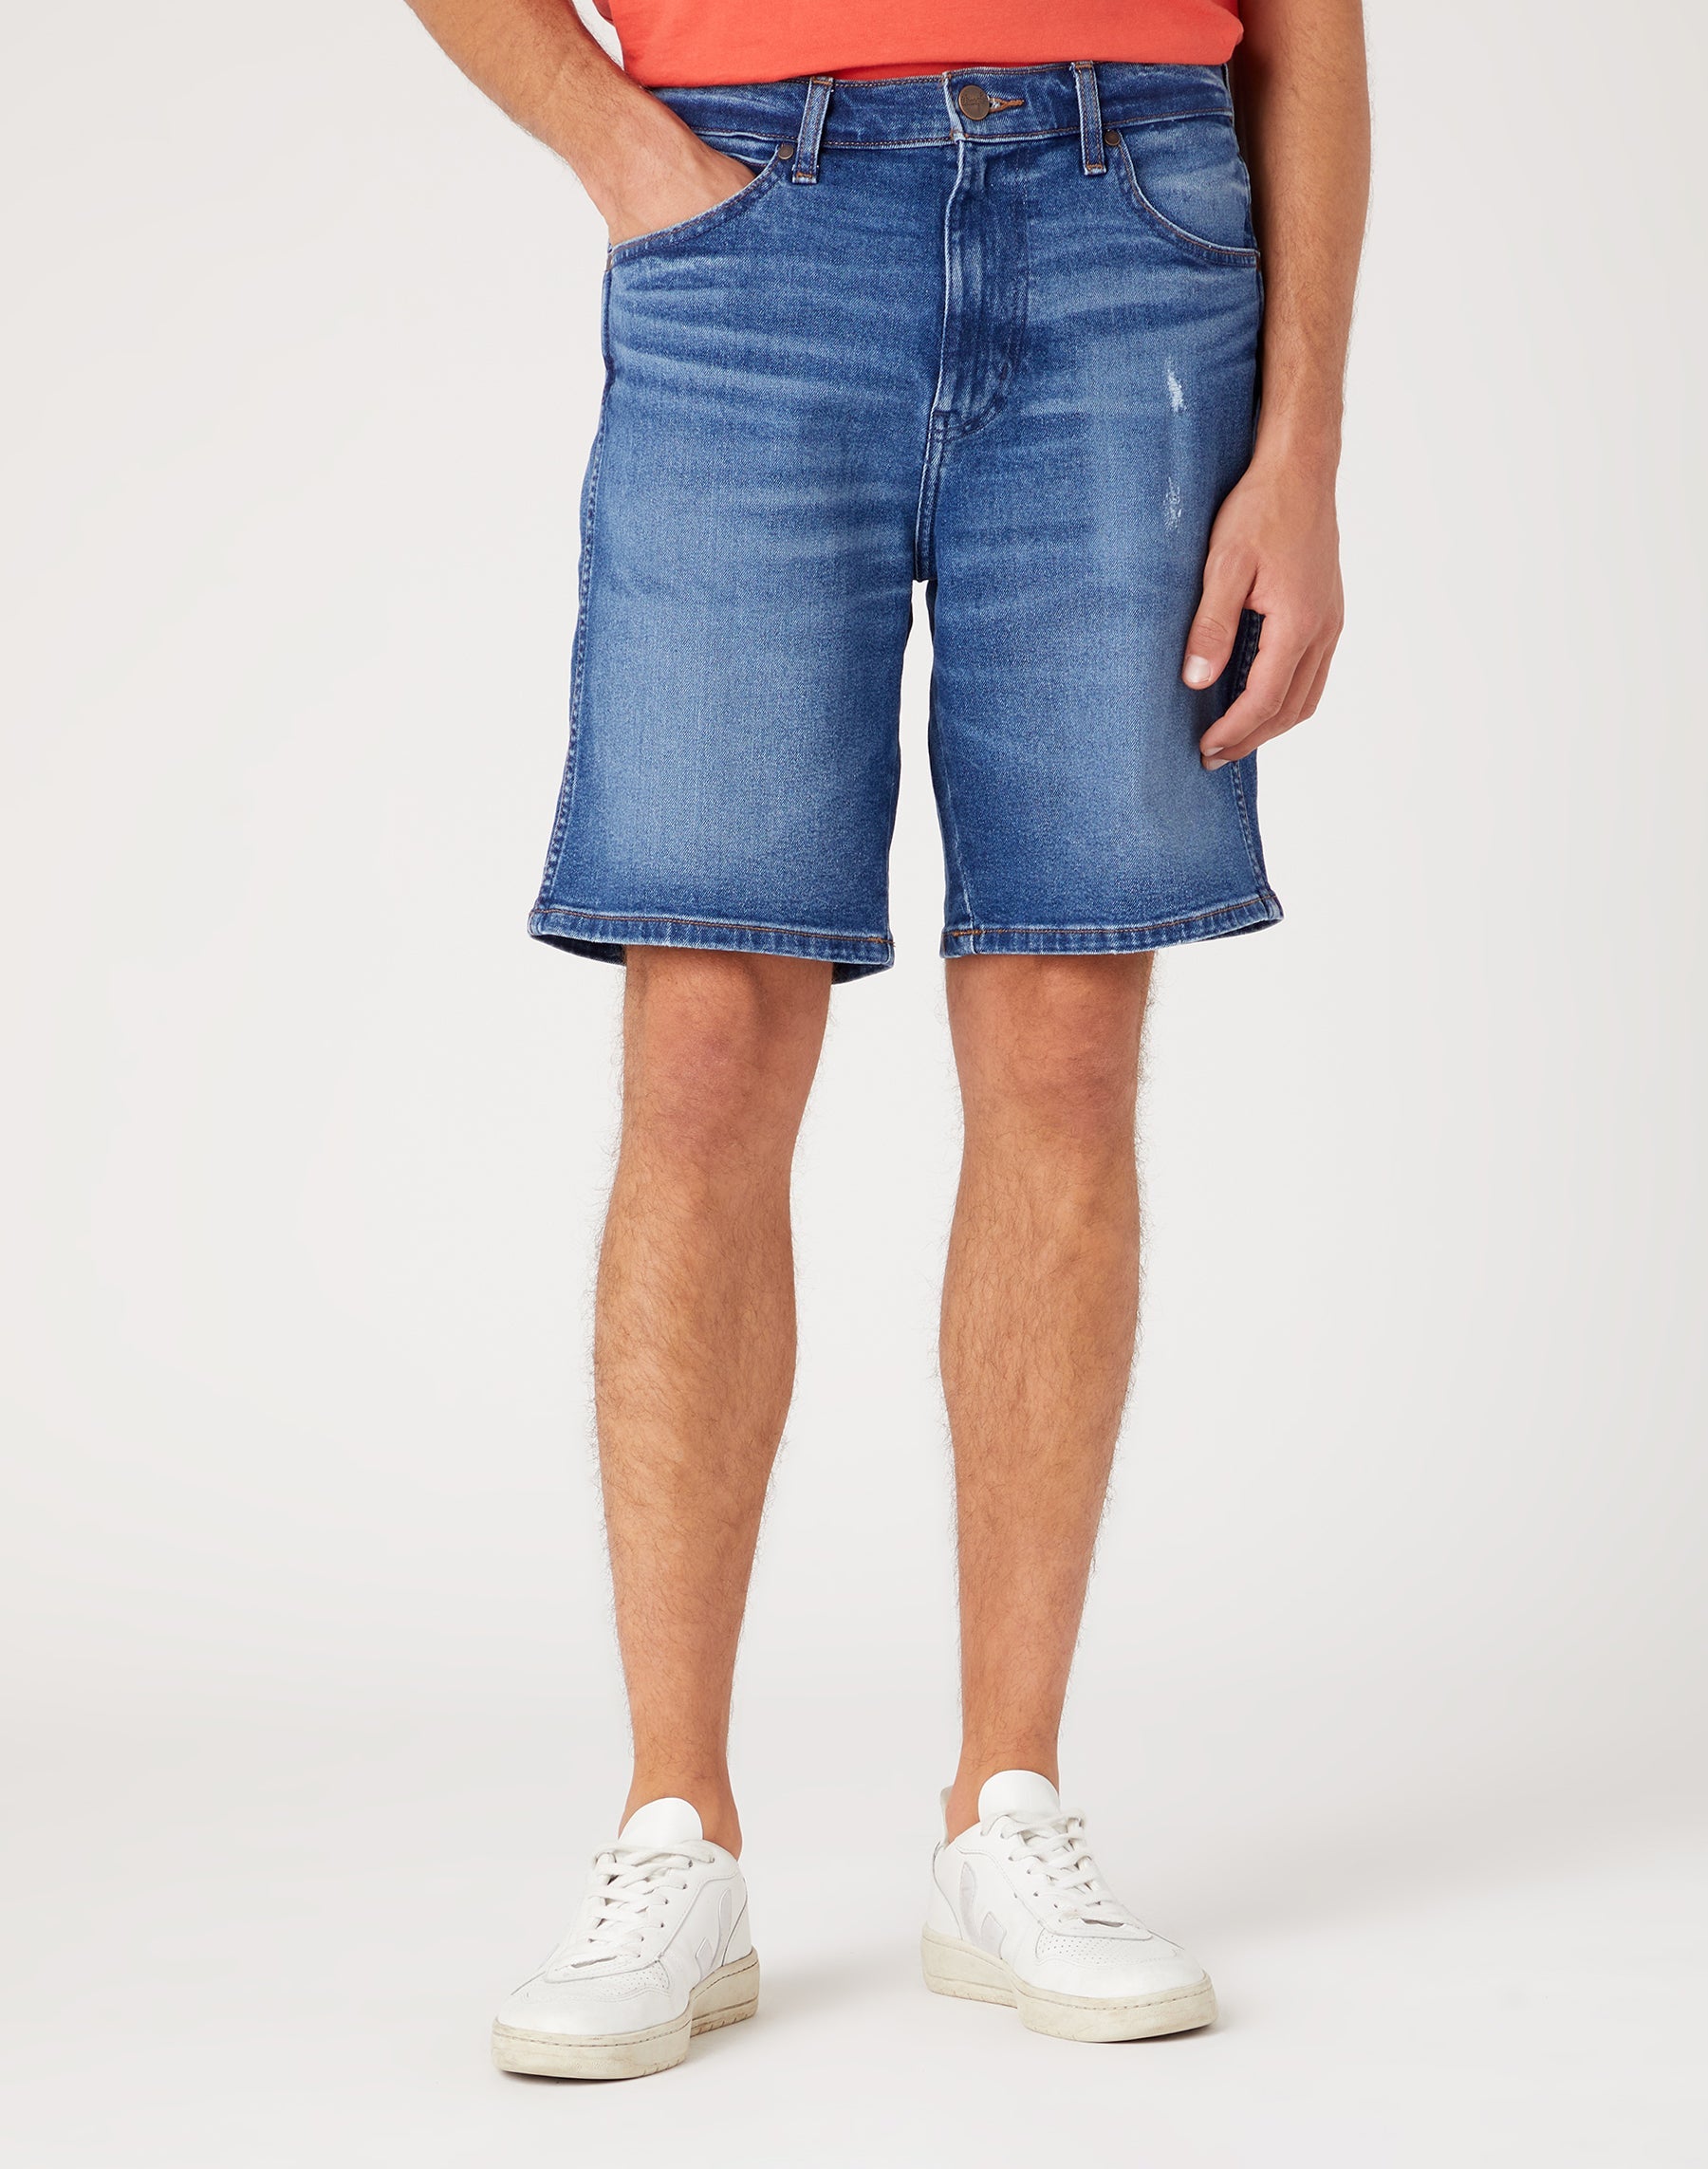 Frontier Short in Be Cool Jeansshorts Wrangler   